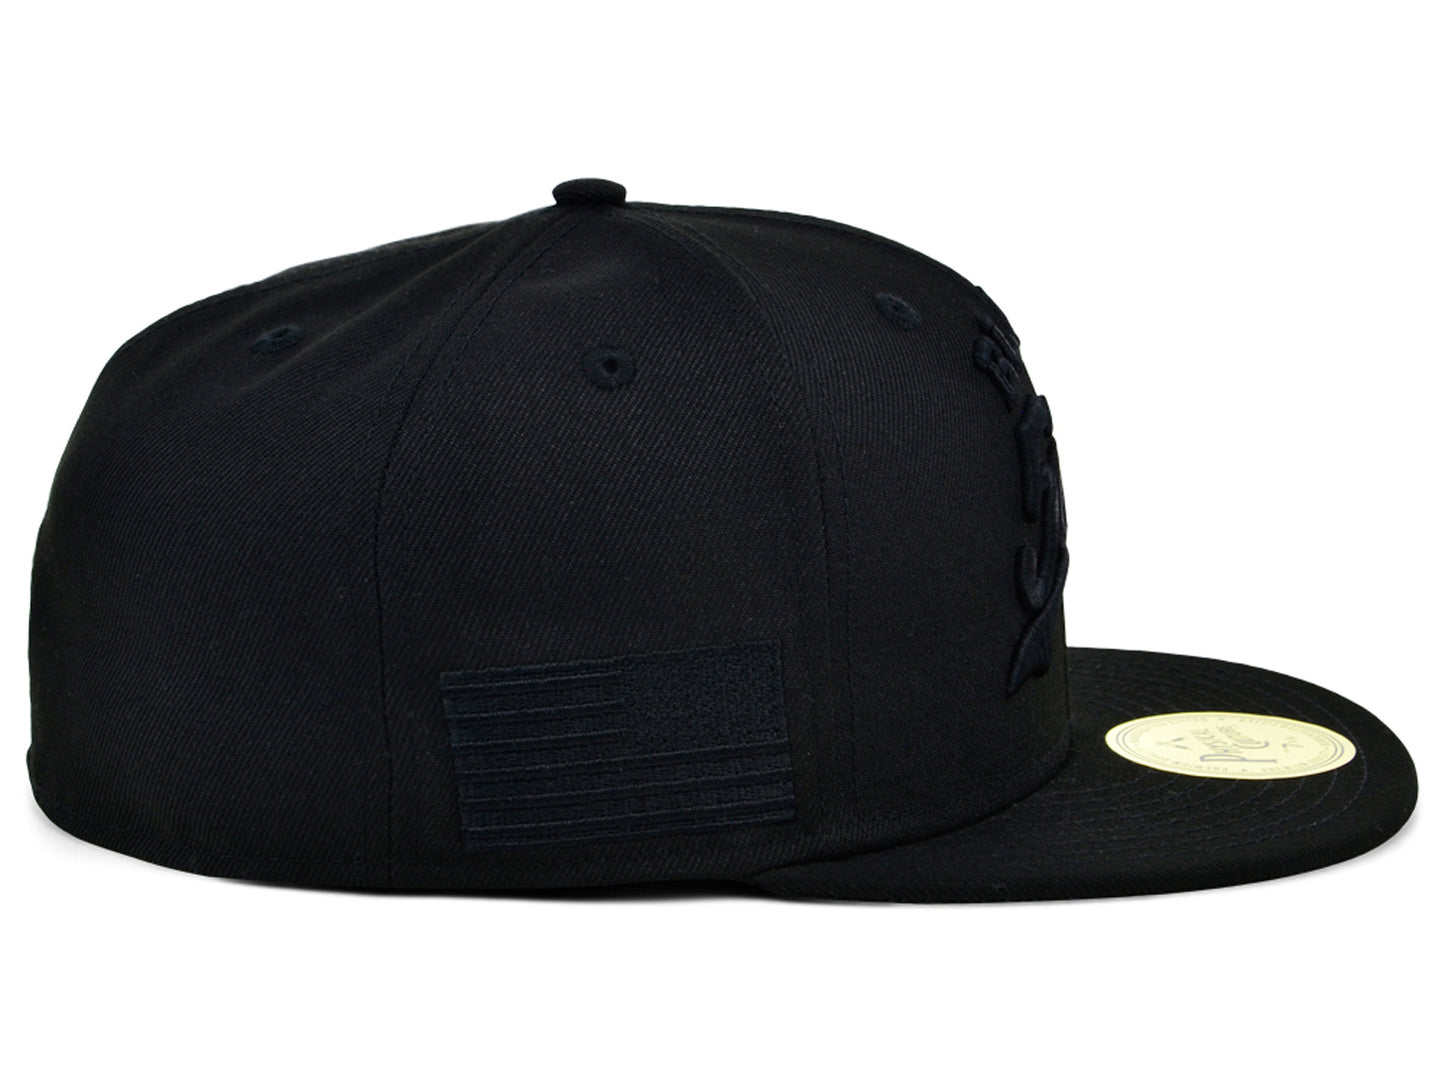 Black 5ives All-Black Tonal Fitted Cap